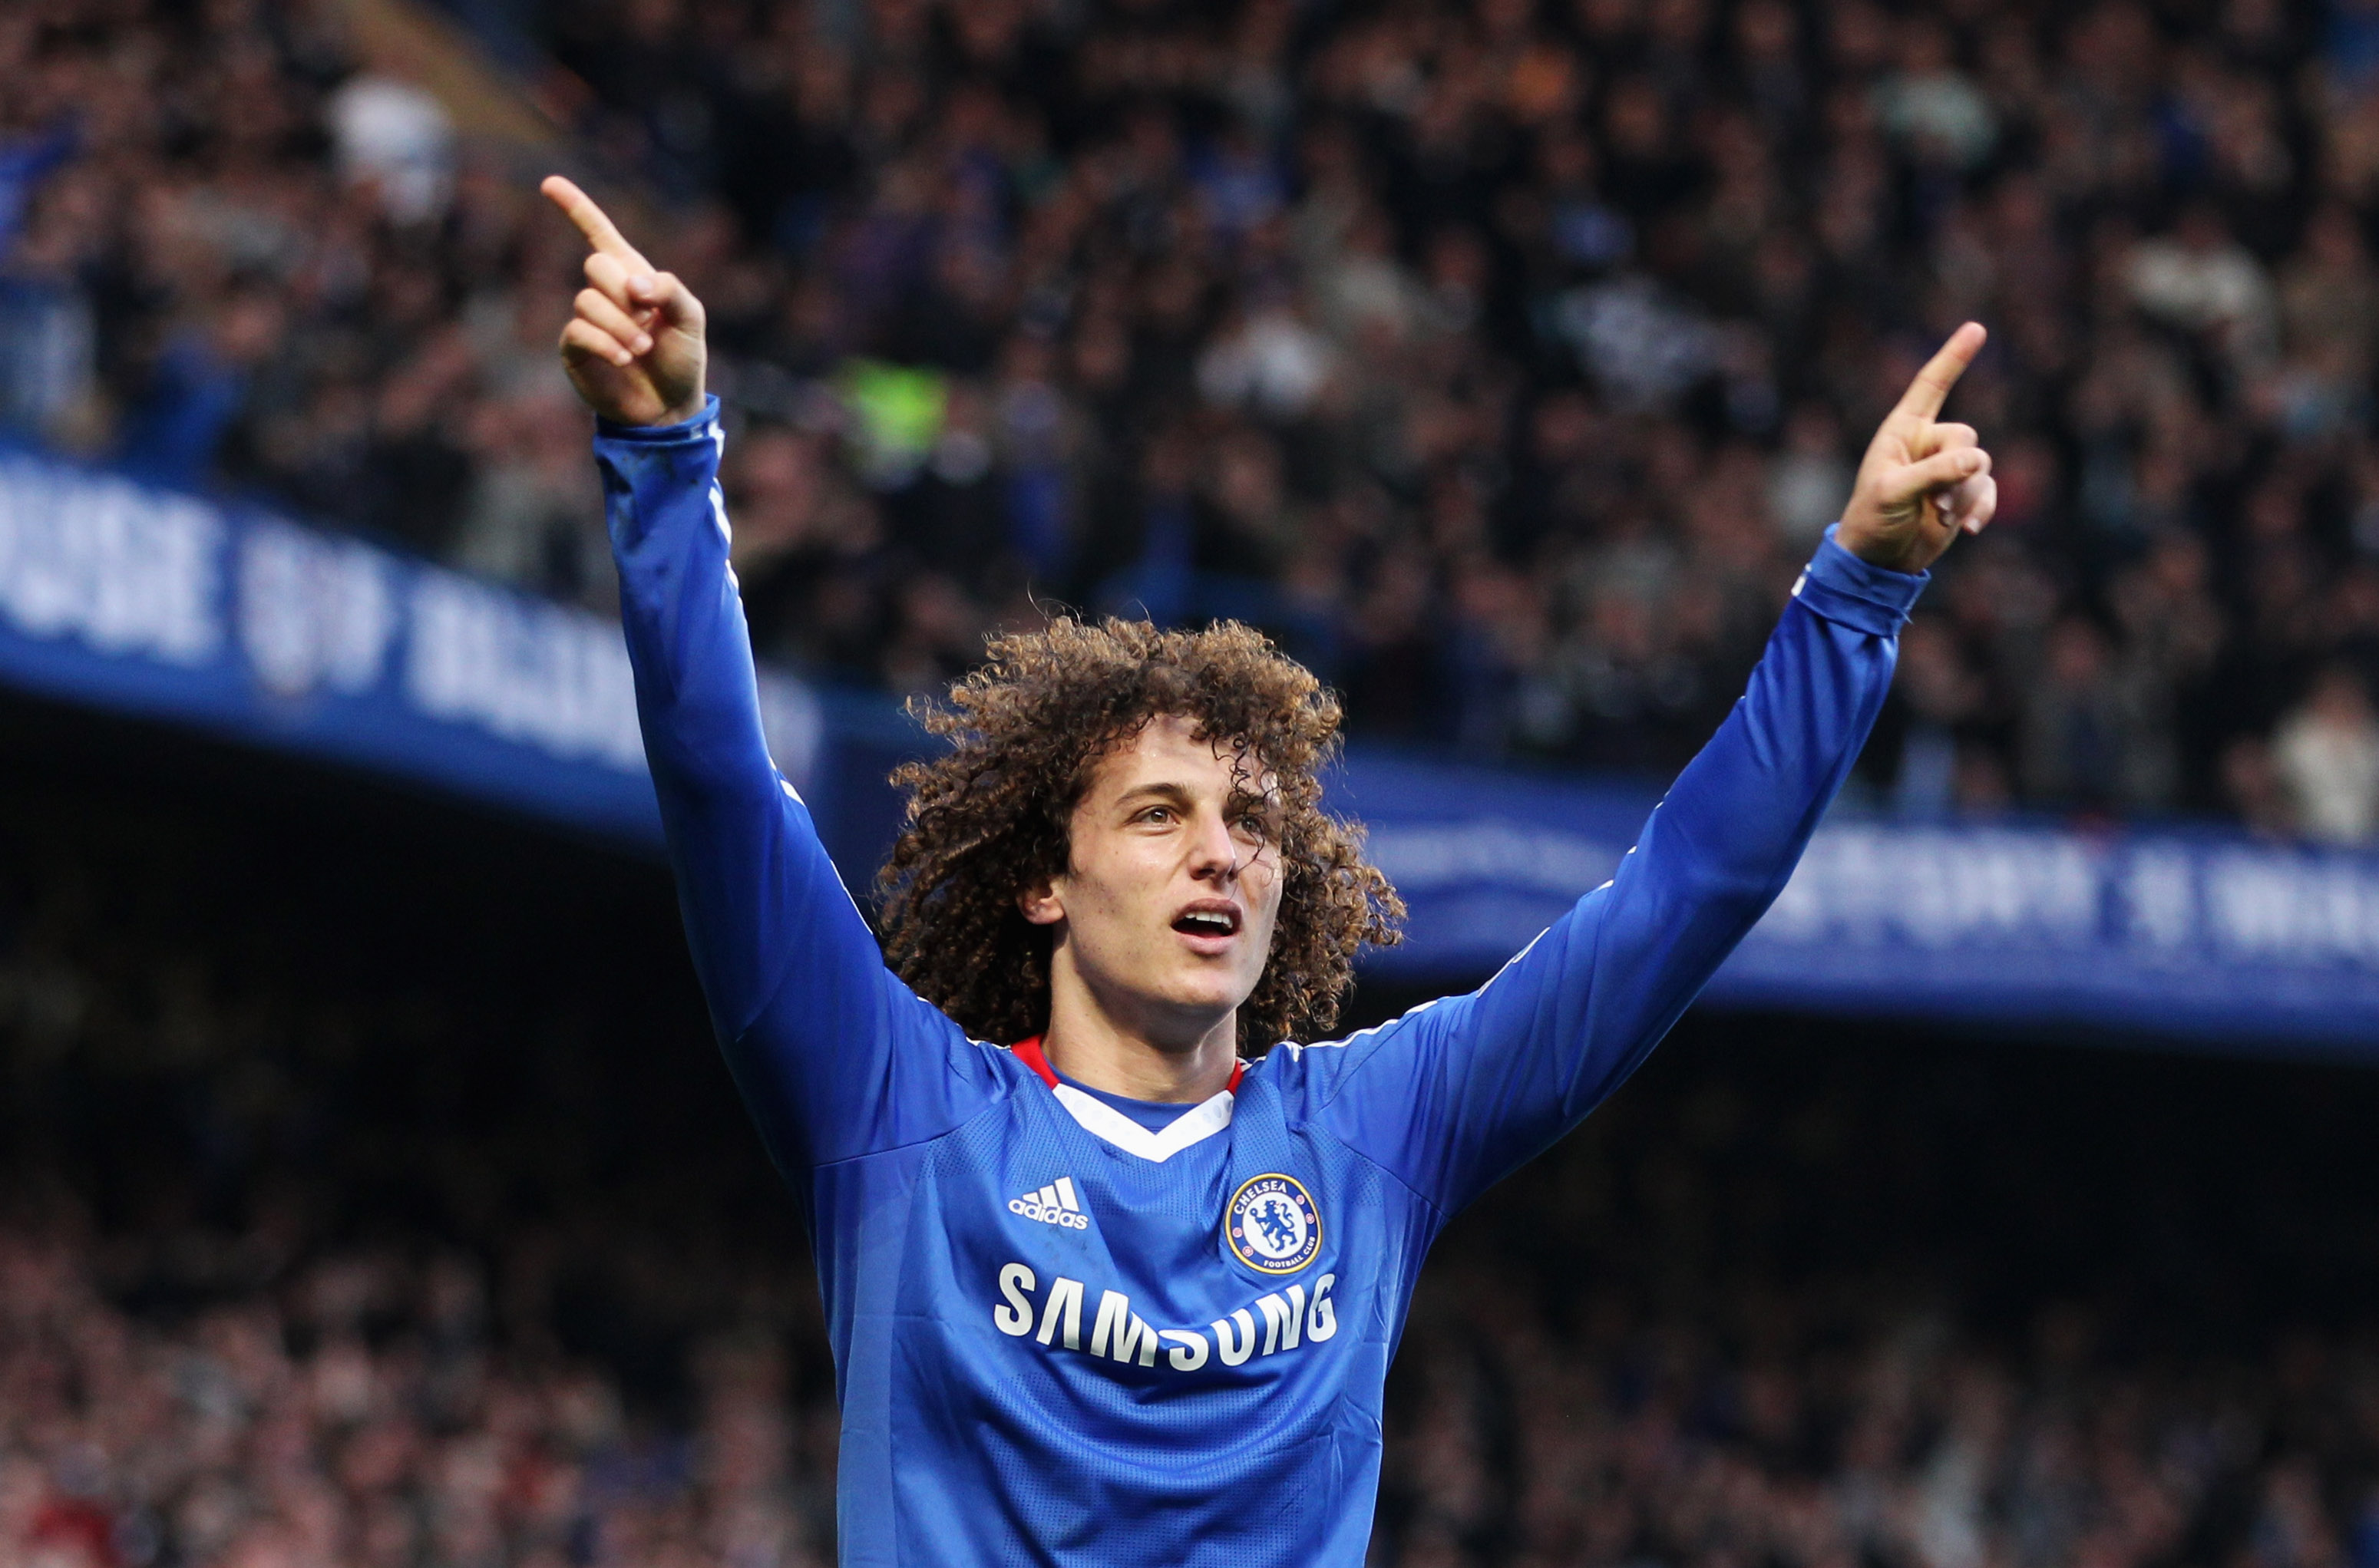 LONDON, ENGLAND - MARCH 20:  David Luiz of Chelsea celebrates as he scores their first goal during the Barclays Premier League match between Chelsea and Manchester City at Stamford Bridge on March 20, 2011 in London, England.  (Photo by Scott Heavey/Getty